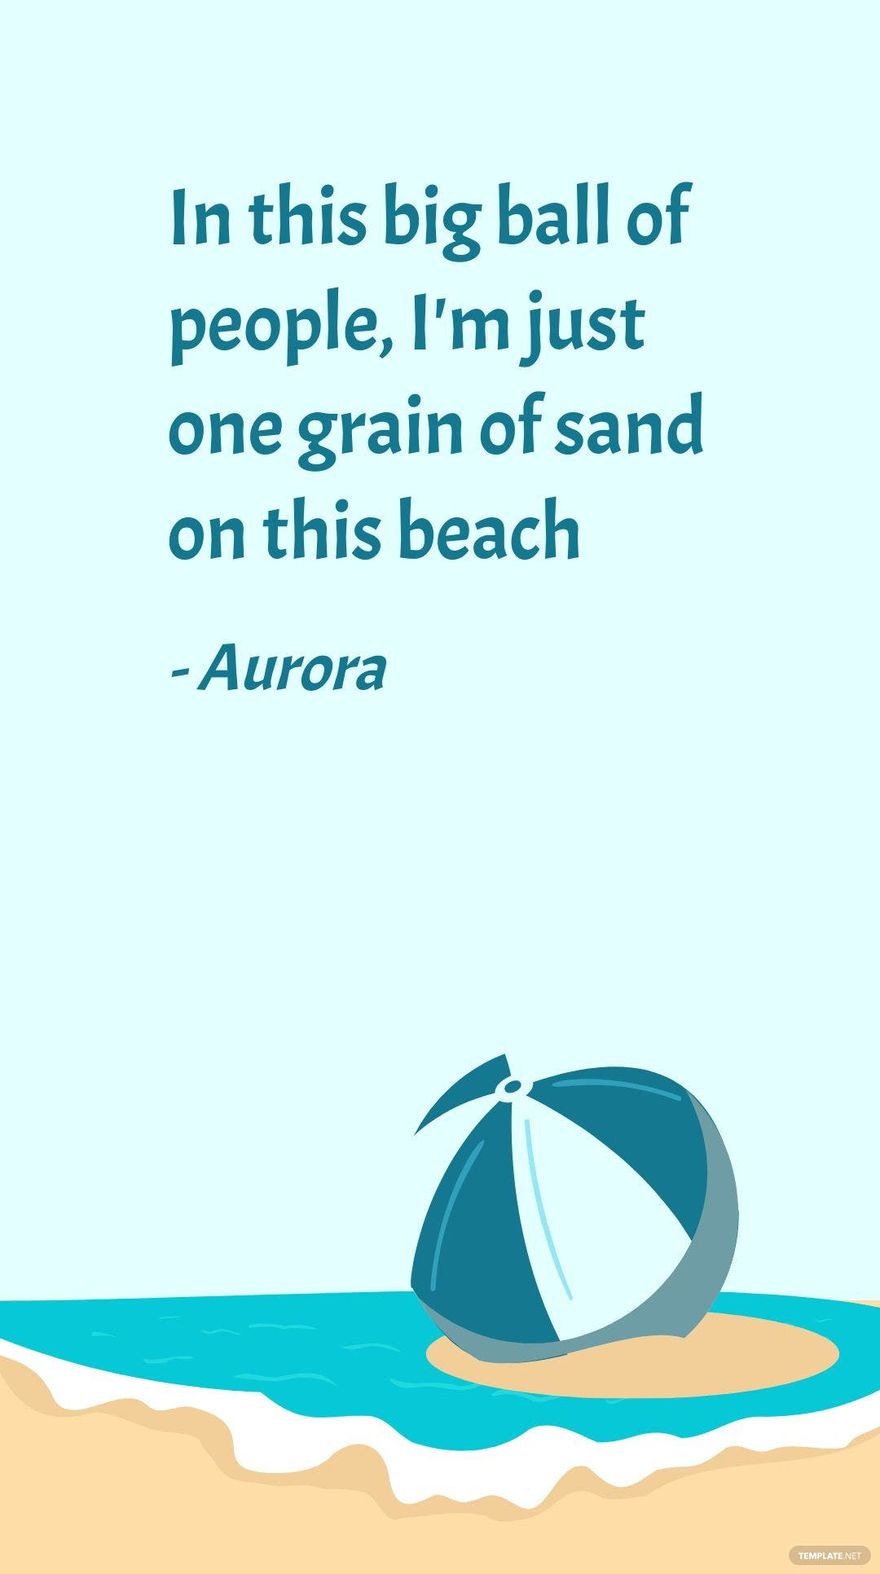 Aurora - In this big ball of people, I'm just one grain of sand on this beach